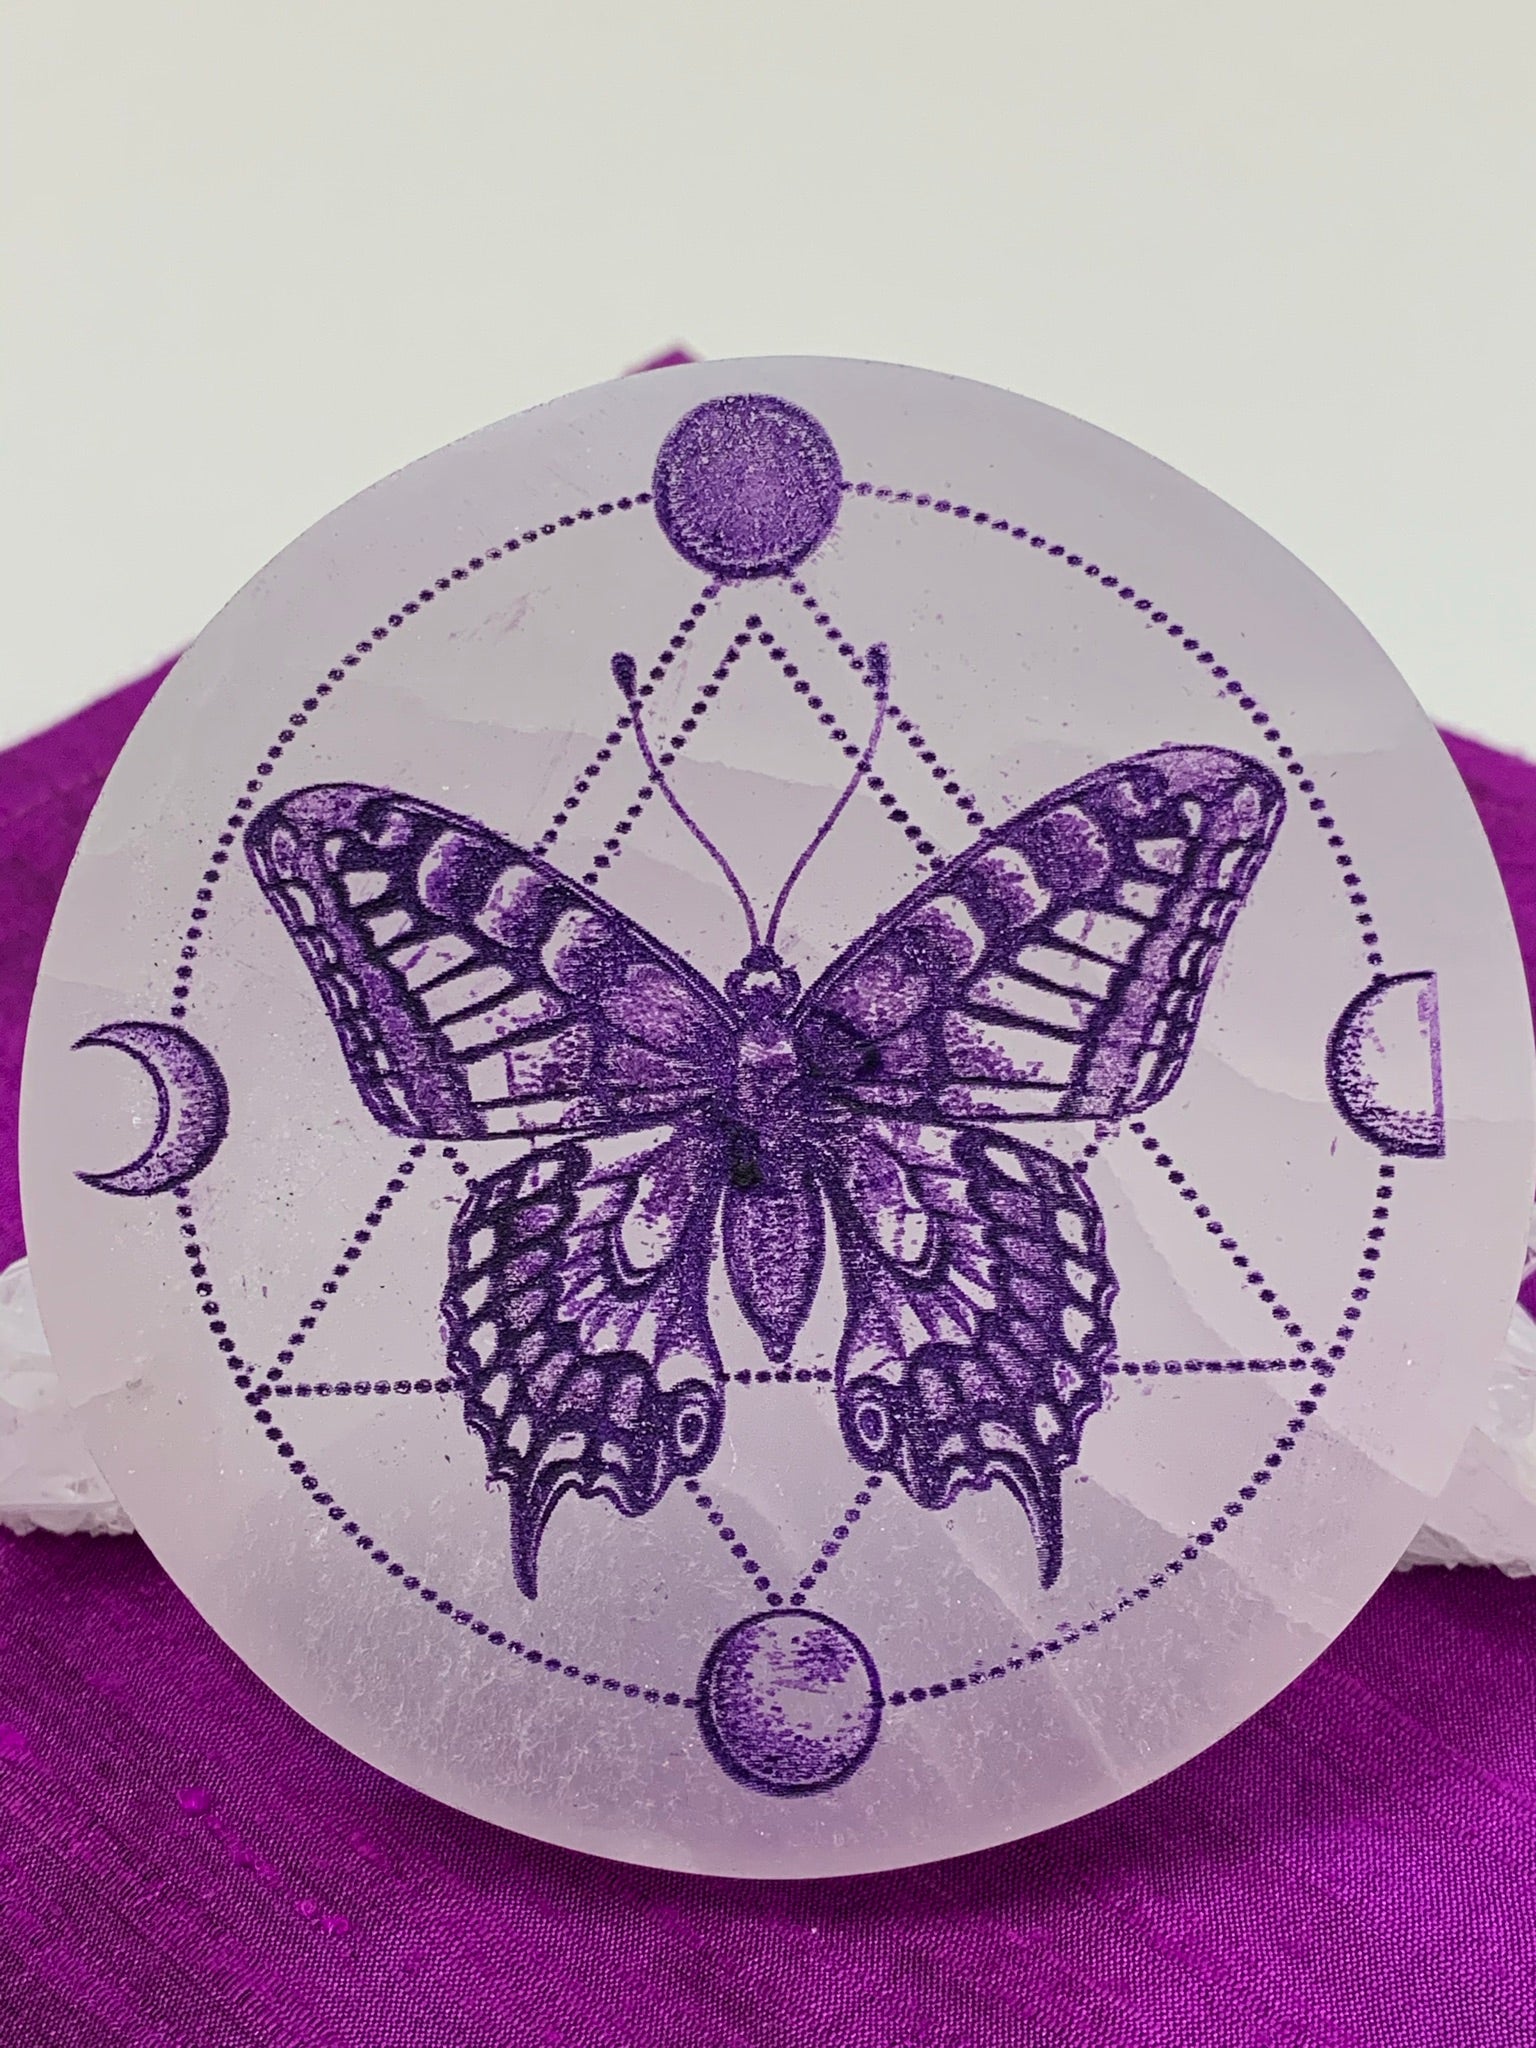 Close-up view. Gorgeous white selenite charging plate with a butterfly in the middle of the plate and moon phases (4) around her with circular and triangular dot designs. Butterfly and other designs are painted purple. The plate is approximately 4" in diameter and approximately ½" thick. It weighs about 9.1 ounces. Butterfly symbolizes transformation and the moon symbolizes feminine energy, intuition and emotions. Selenite plates are used for charging other crystals, gemstones and jewelry.